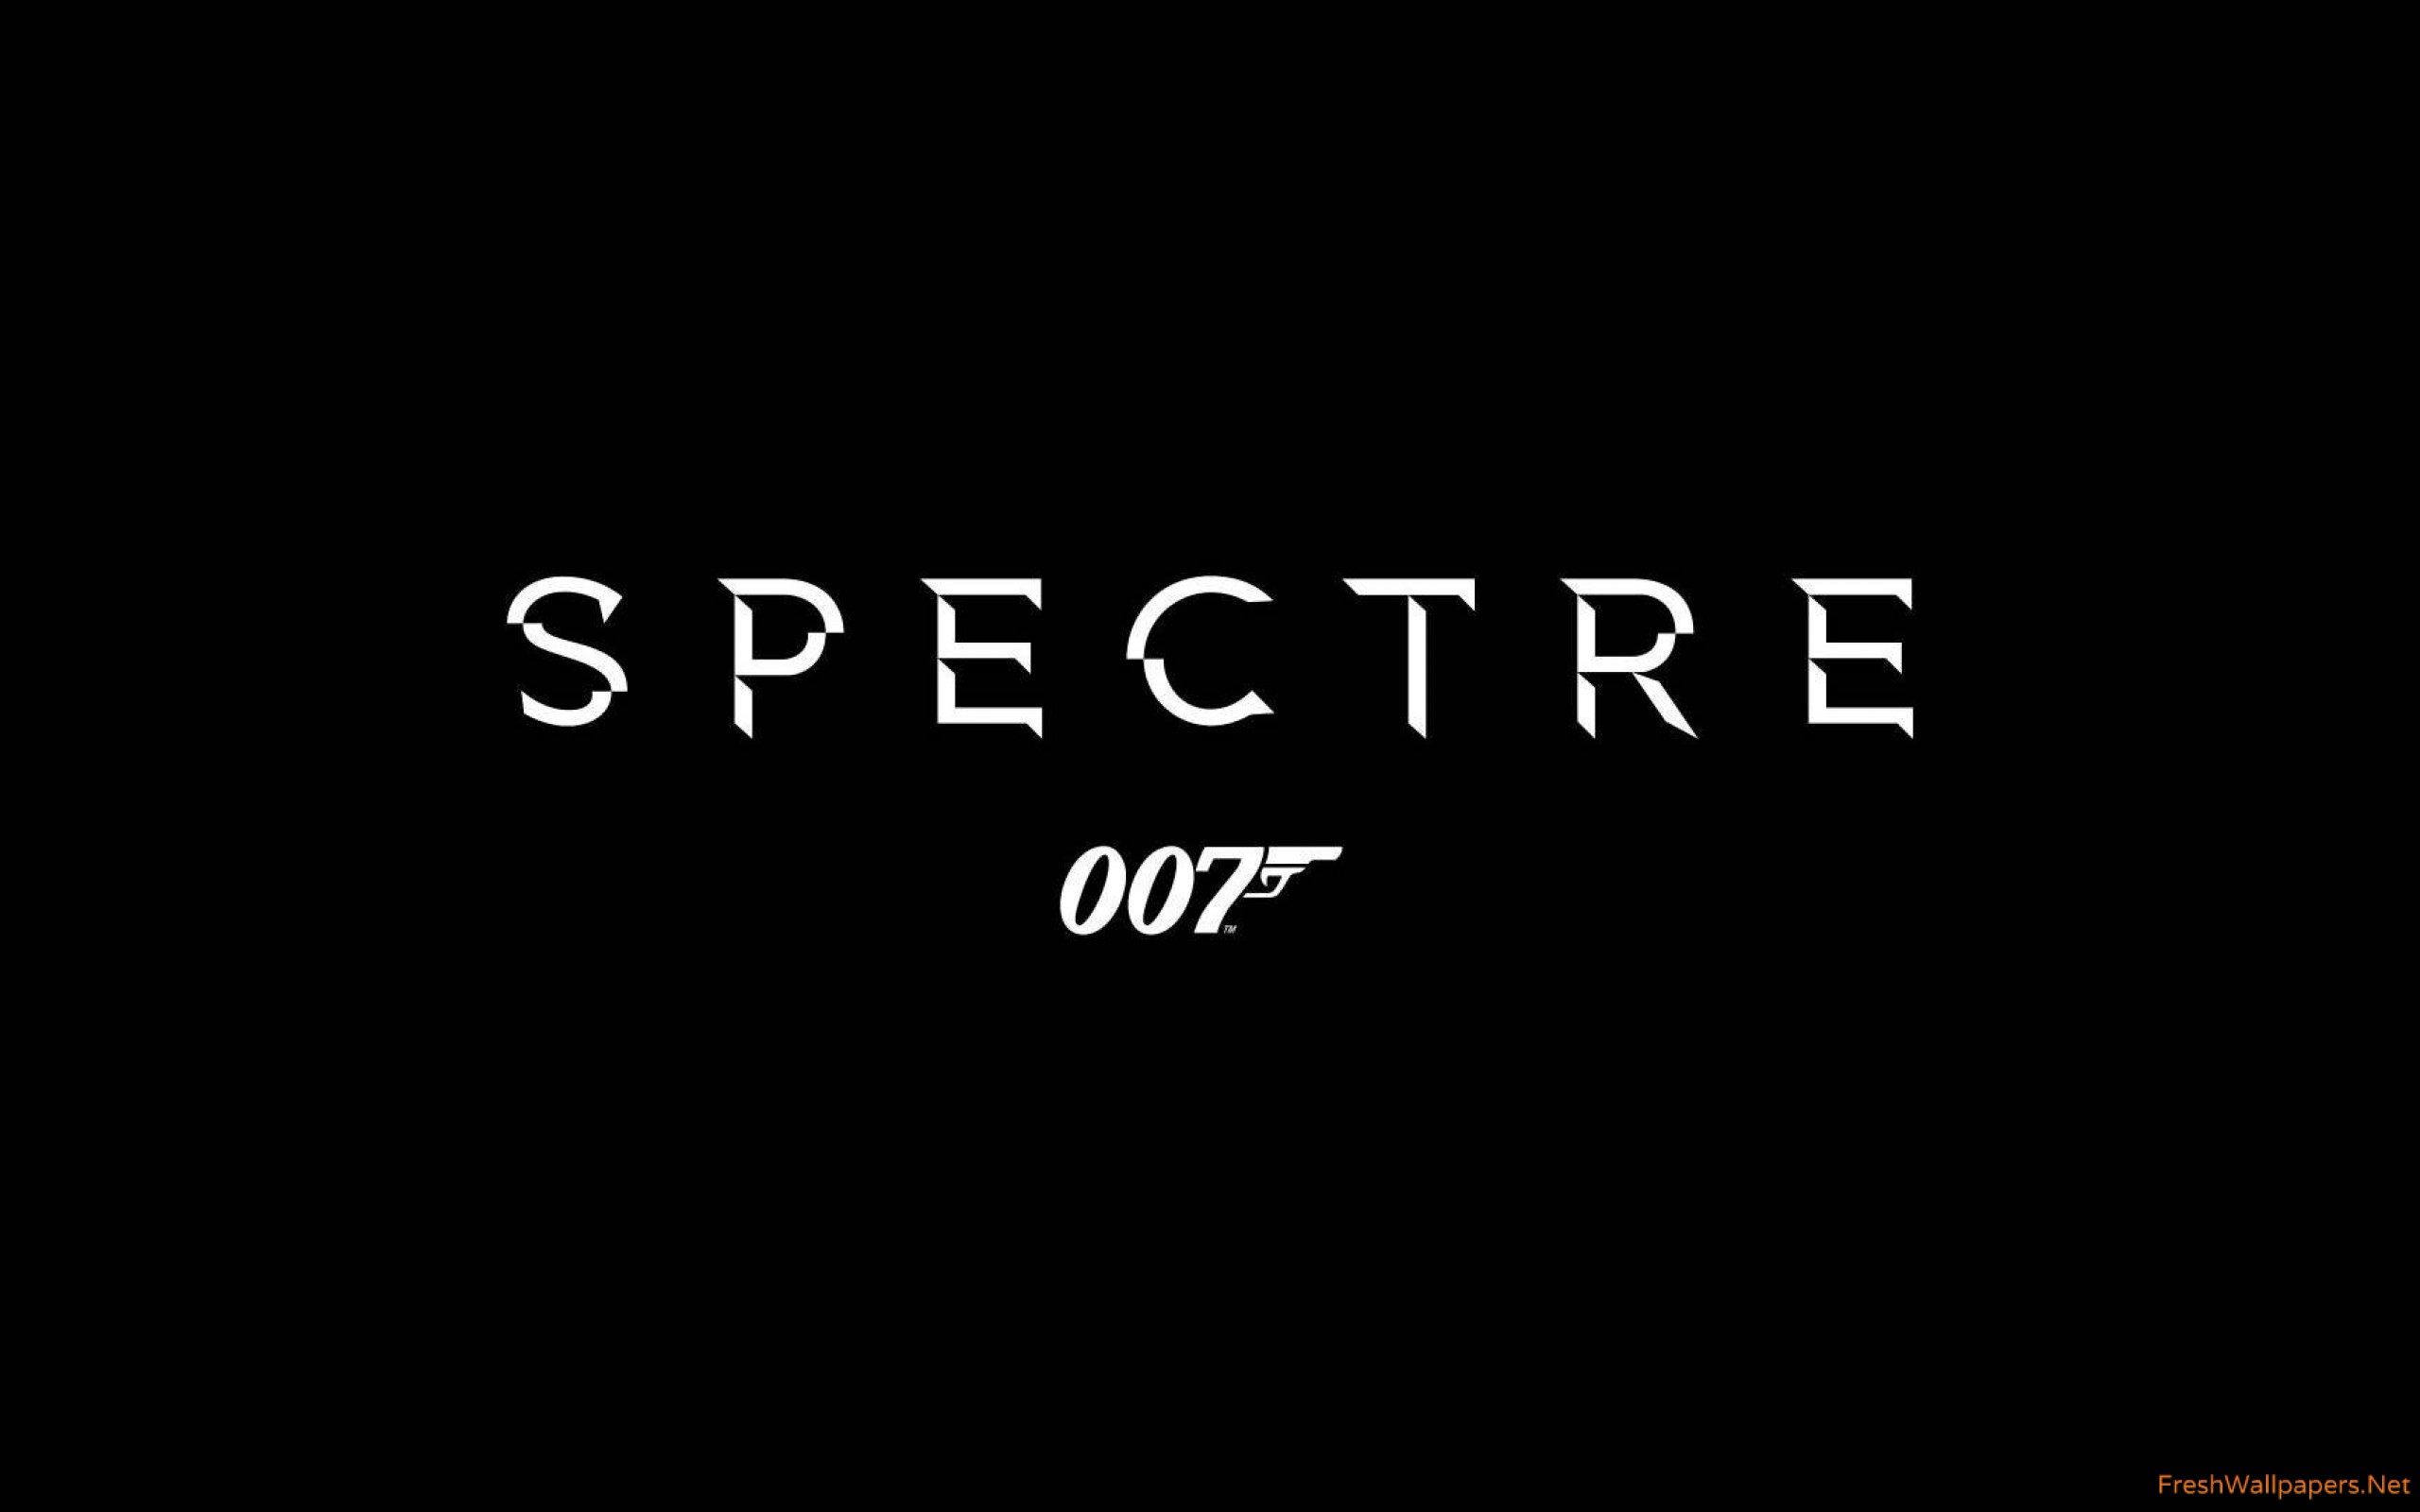 Spectre 007 wallpapers | Freshwallpapers